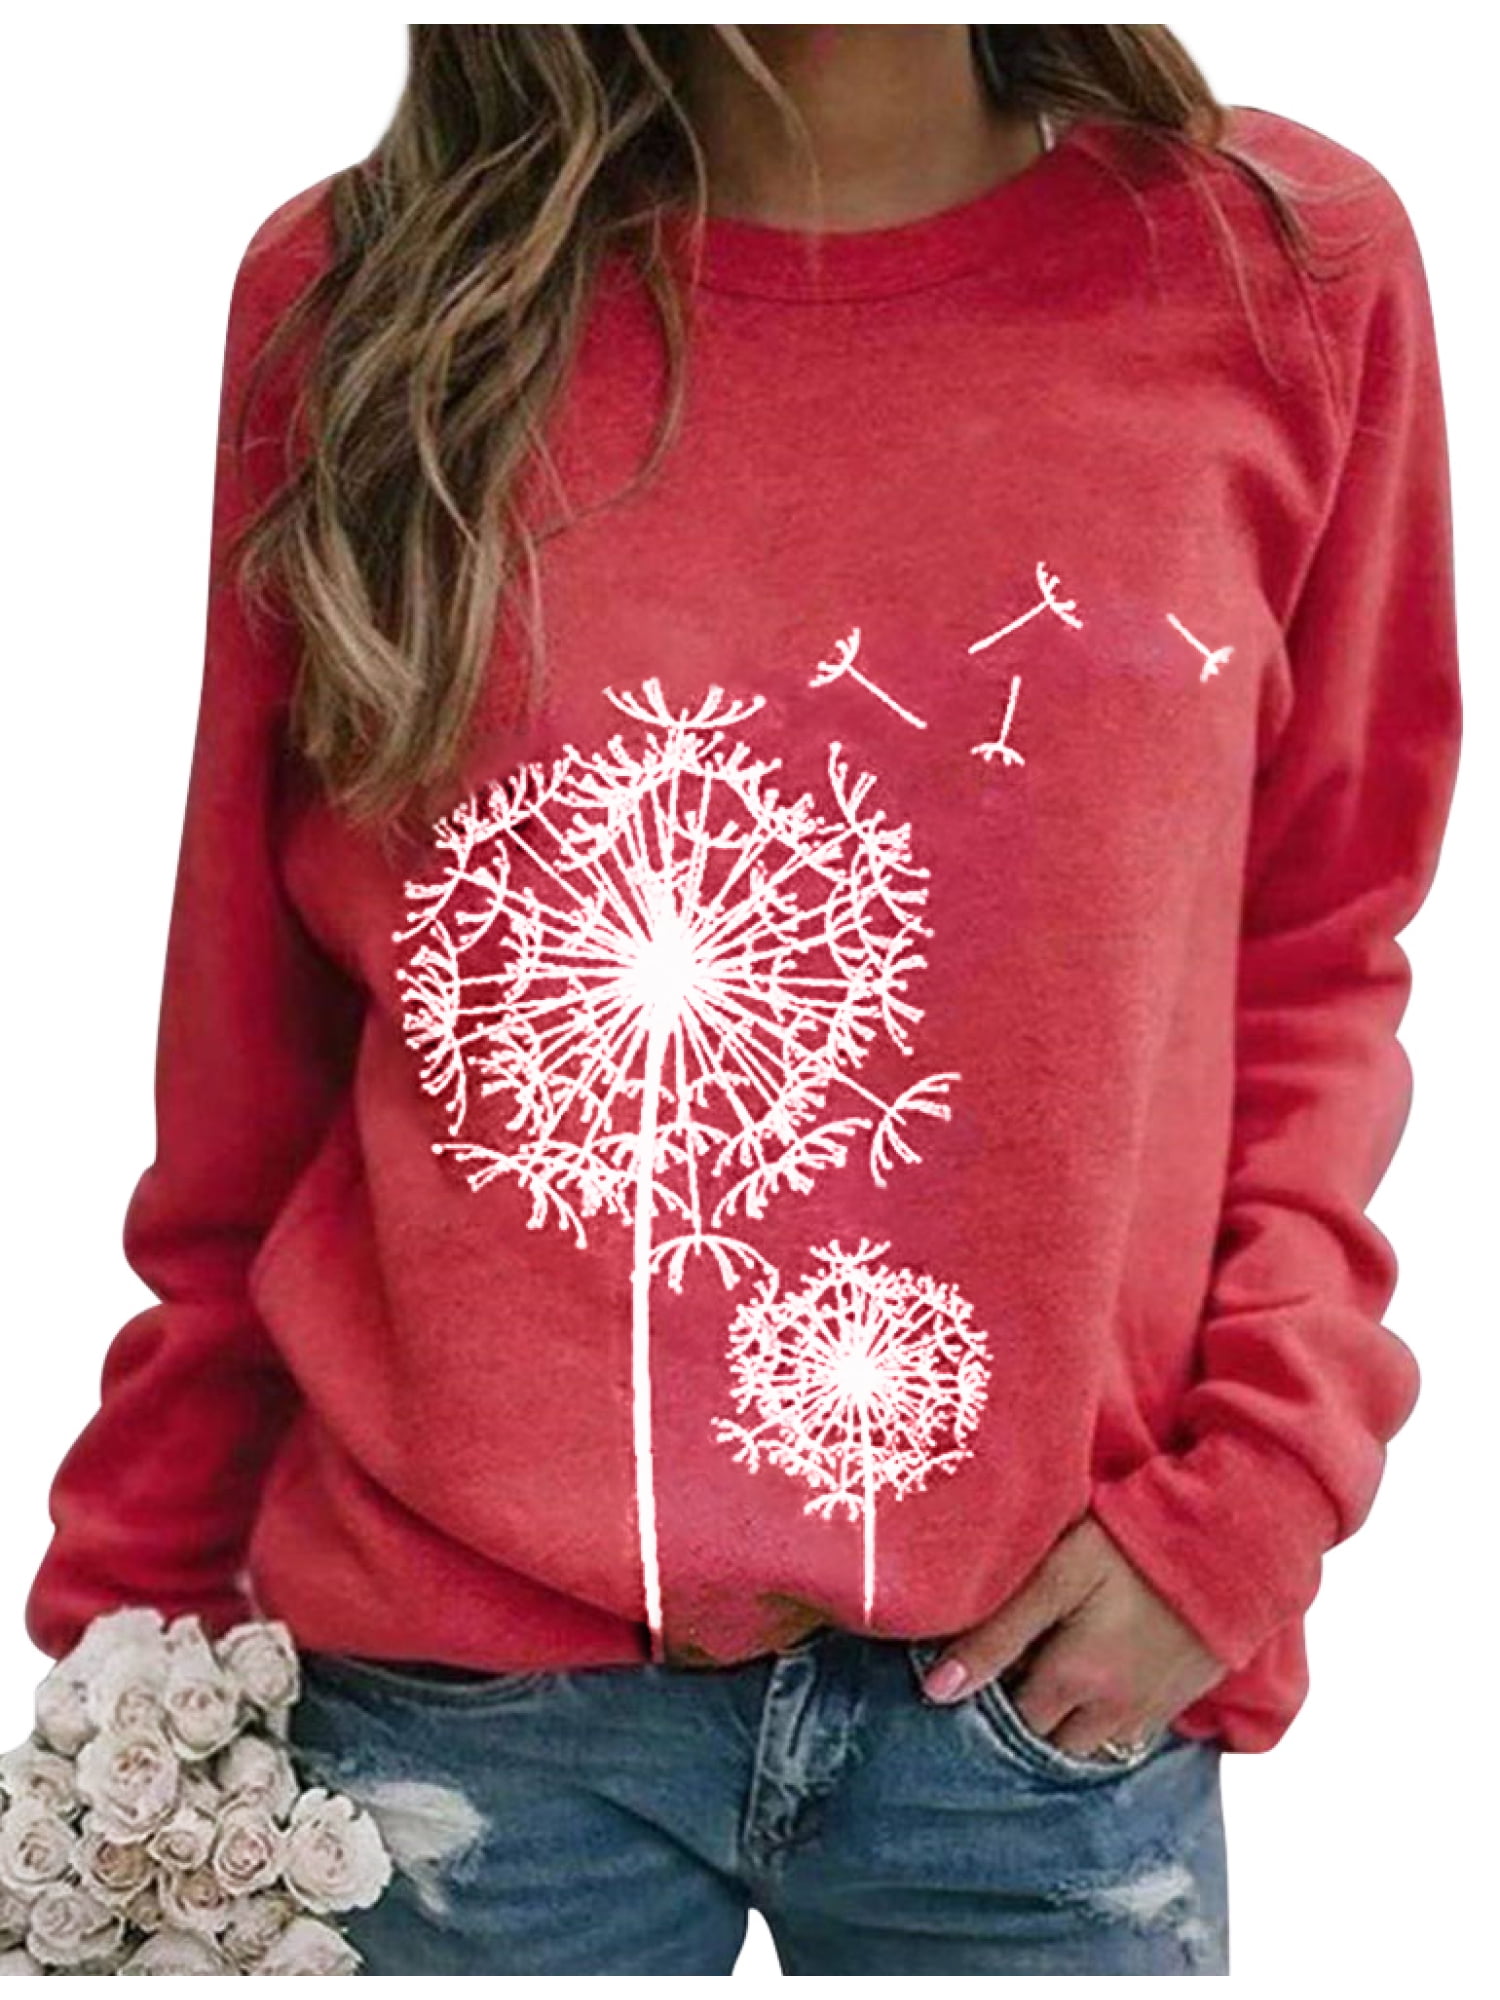 Love Crew Neck Comfy Tees Shirts Top Dandelion with Hearts Womens Crewneck Long Sleeve XX-Large